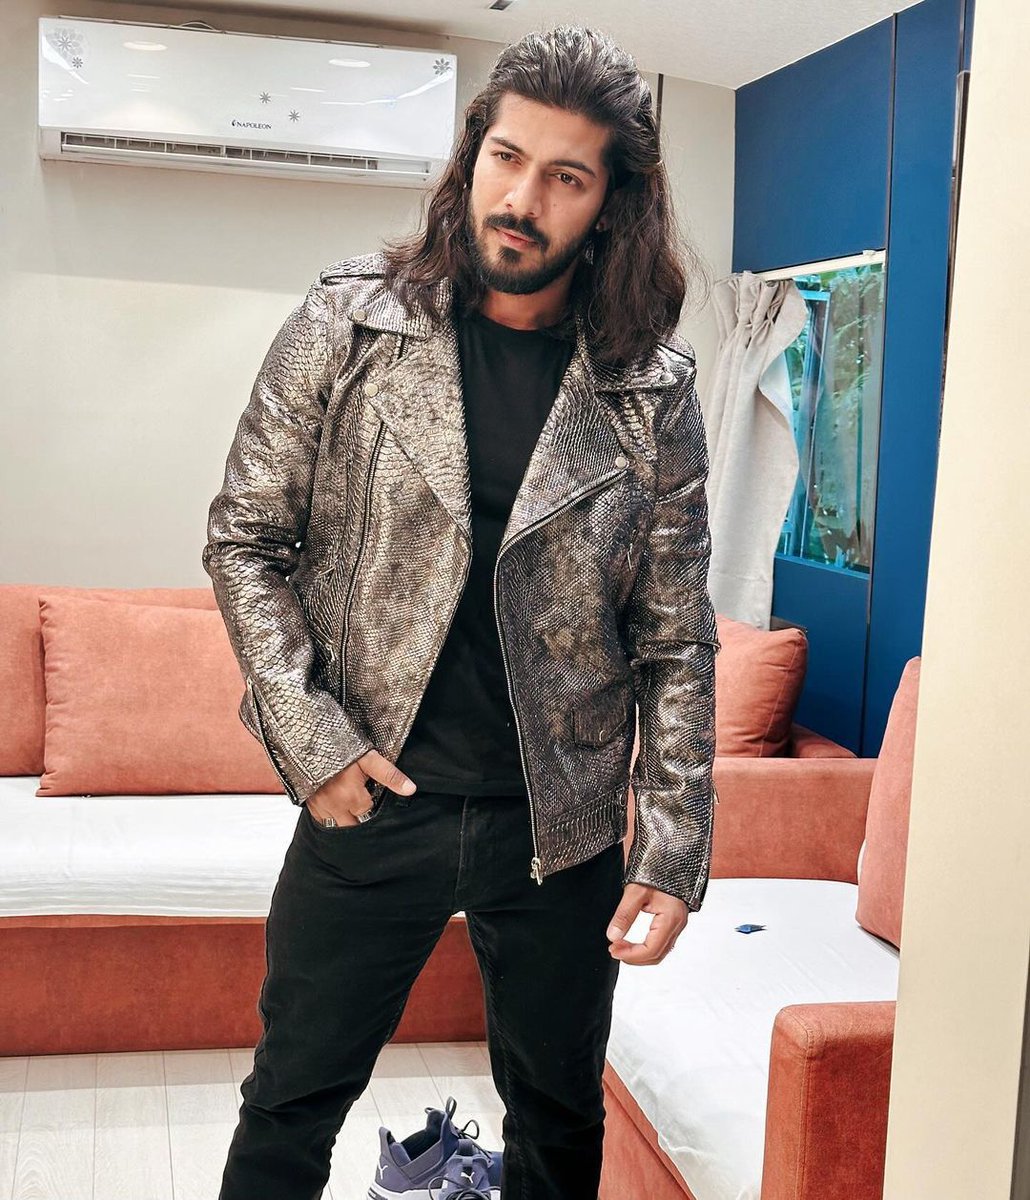 Actor Sheezan Khan knows : Never waste a good hair day! 🌻🌻 @Sheezan9 #goodhairday #sheezankhan #hairdo #KhatronKeKhiladi13